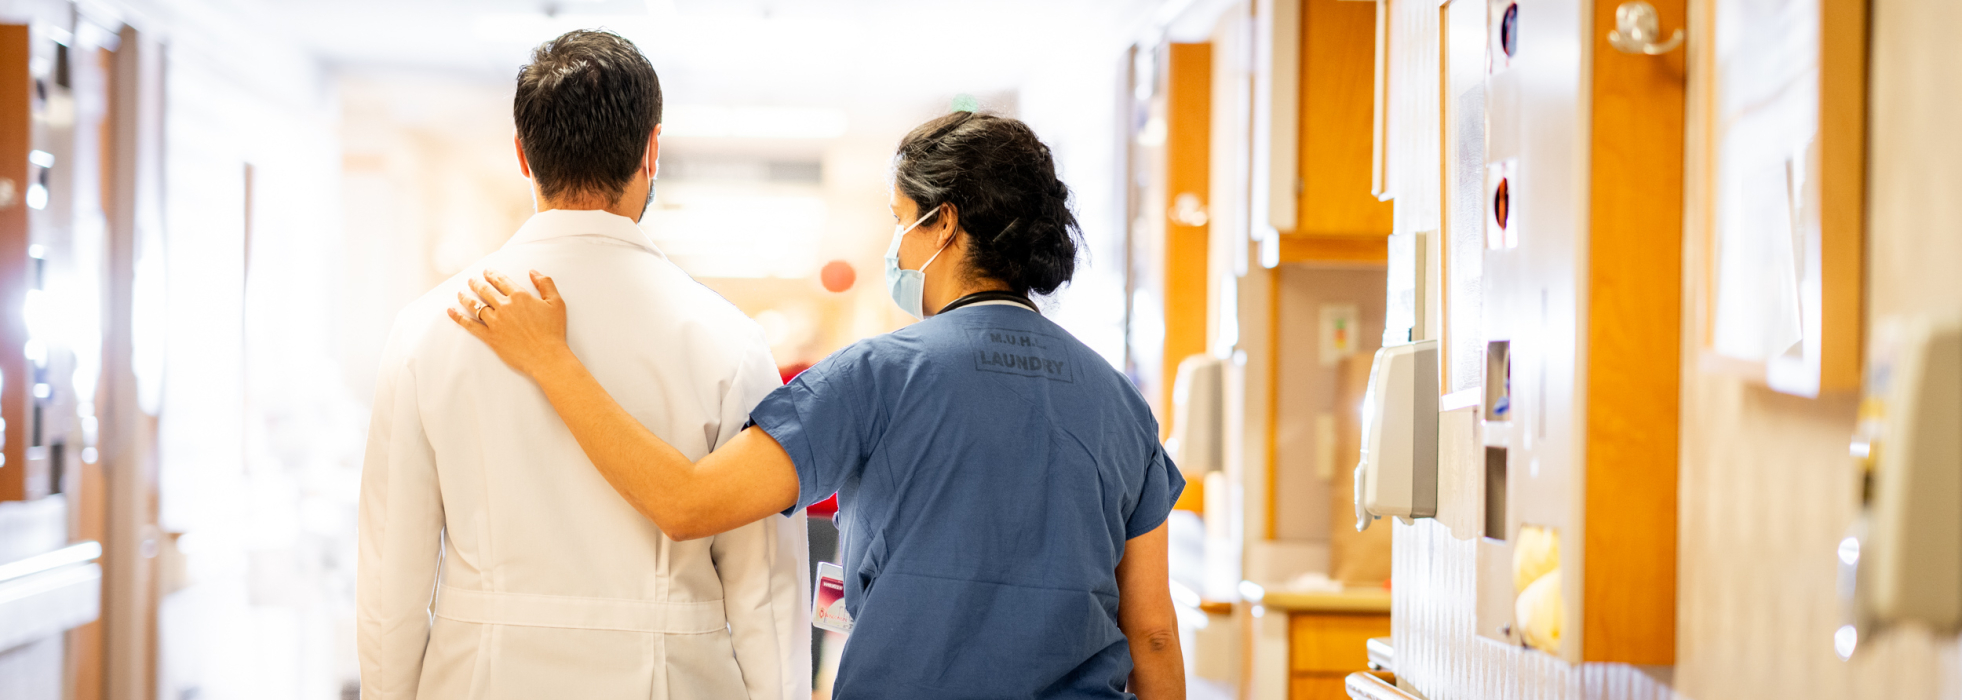 A female clinician in blue scrubs touches the shoulder of a male colleauge in a white coat while walking in the hospital hallway